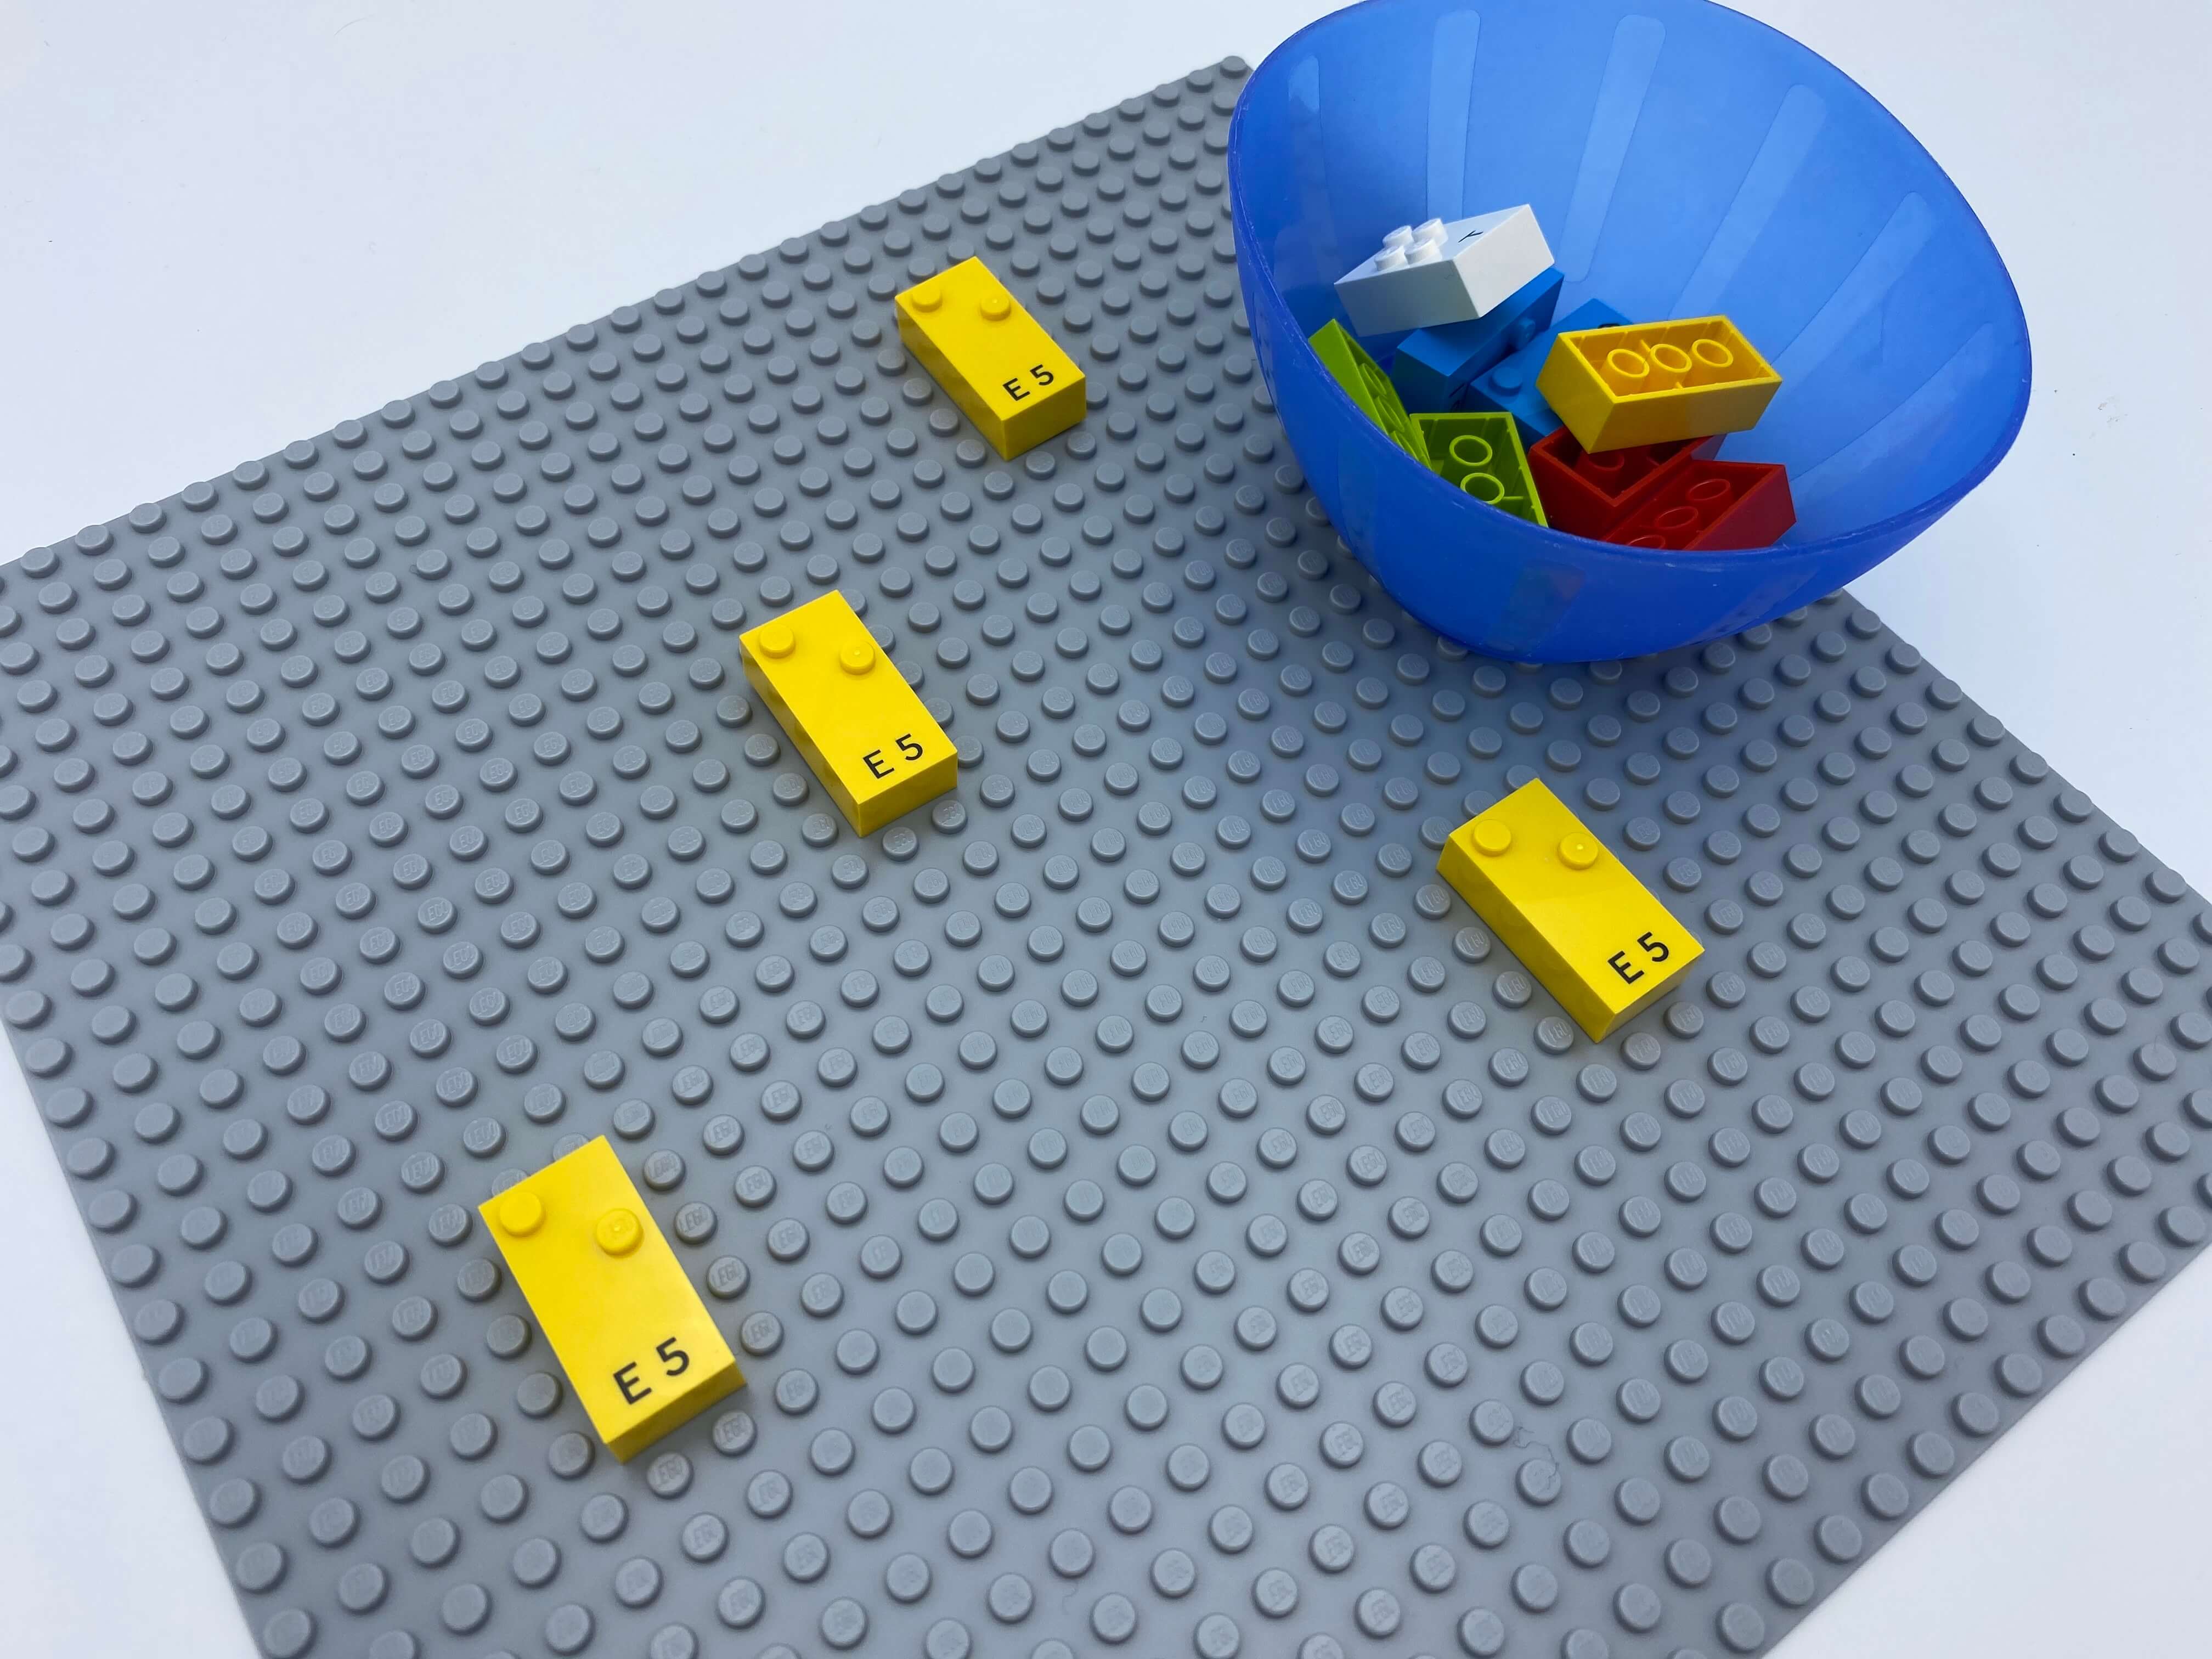 4 letter bricks spread over the base plate, one bowl with bricks.